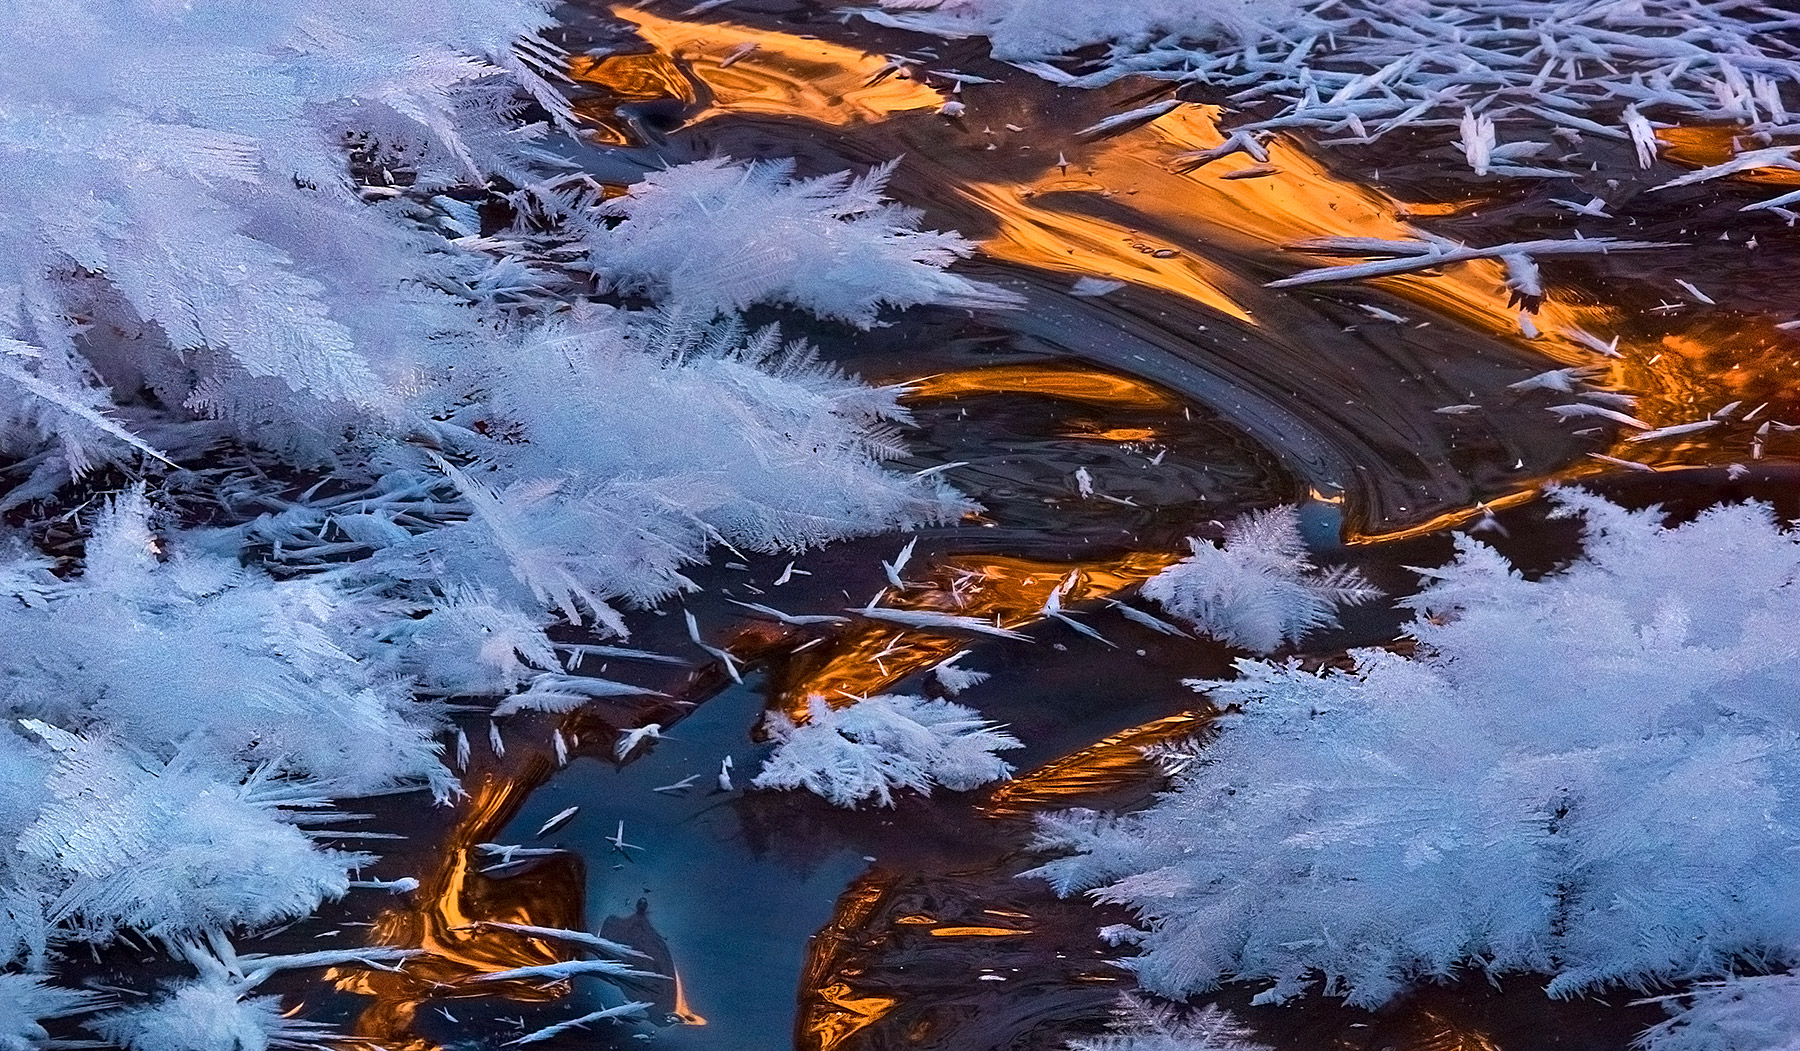 Reflected light off high peaks in the Yukon is cast onto ice crystals and hoar frost formations atop a small stream.